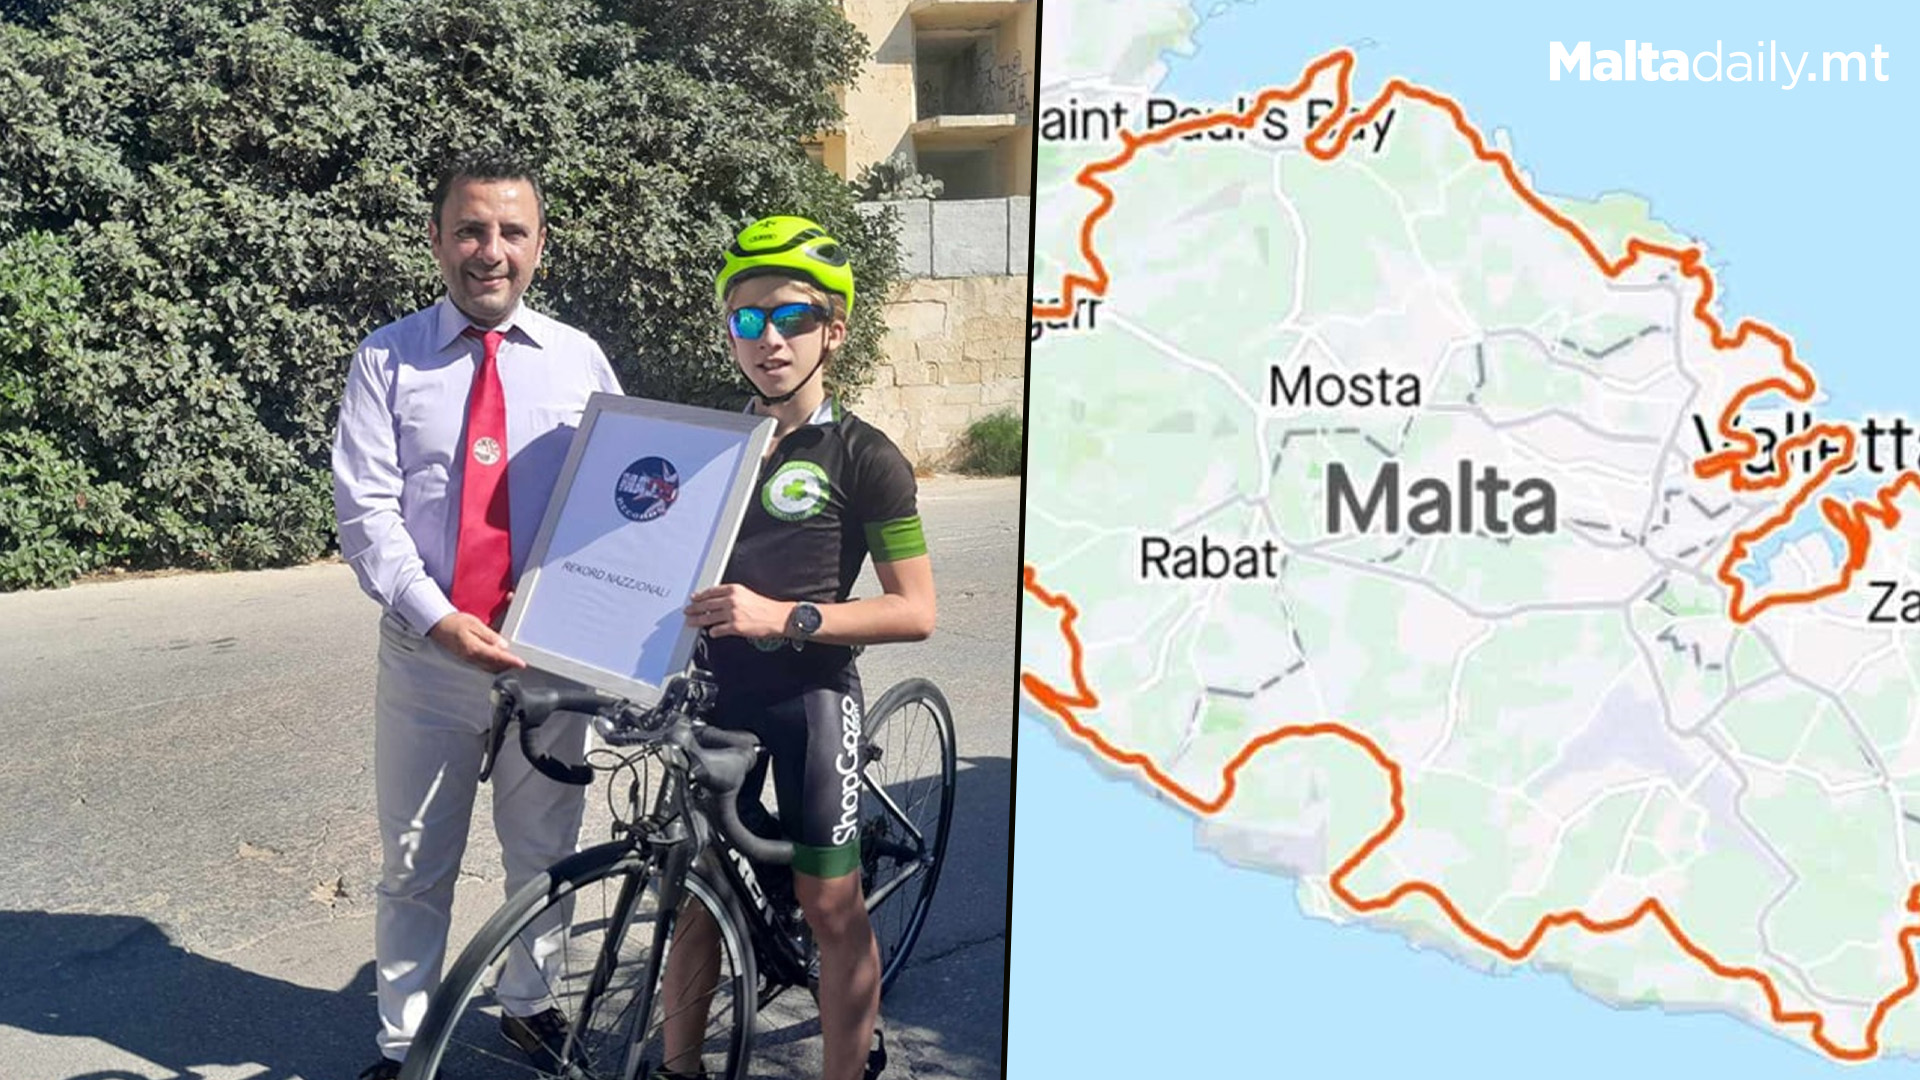 12 Year Old Boy Youngest To Cycle Around Malta In Least Time